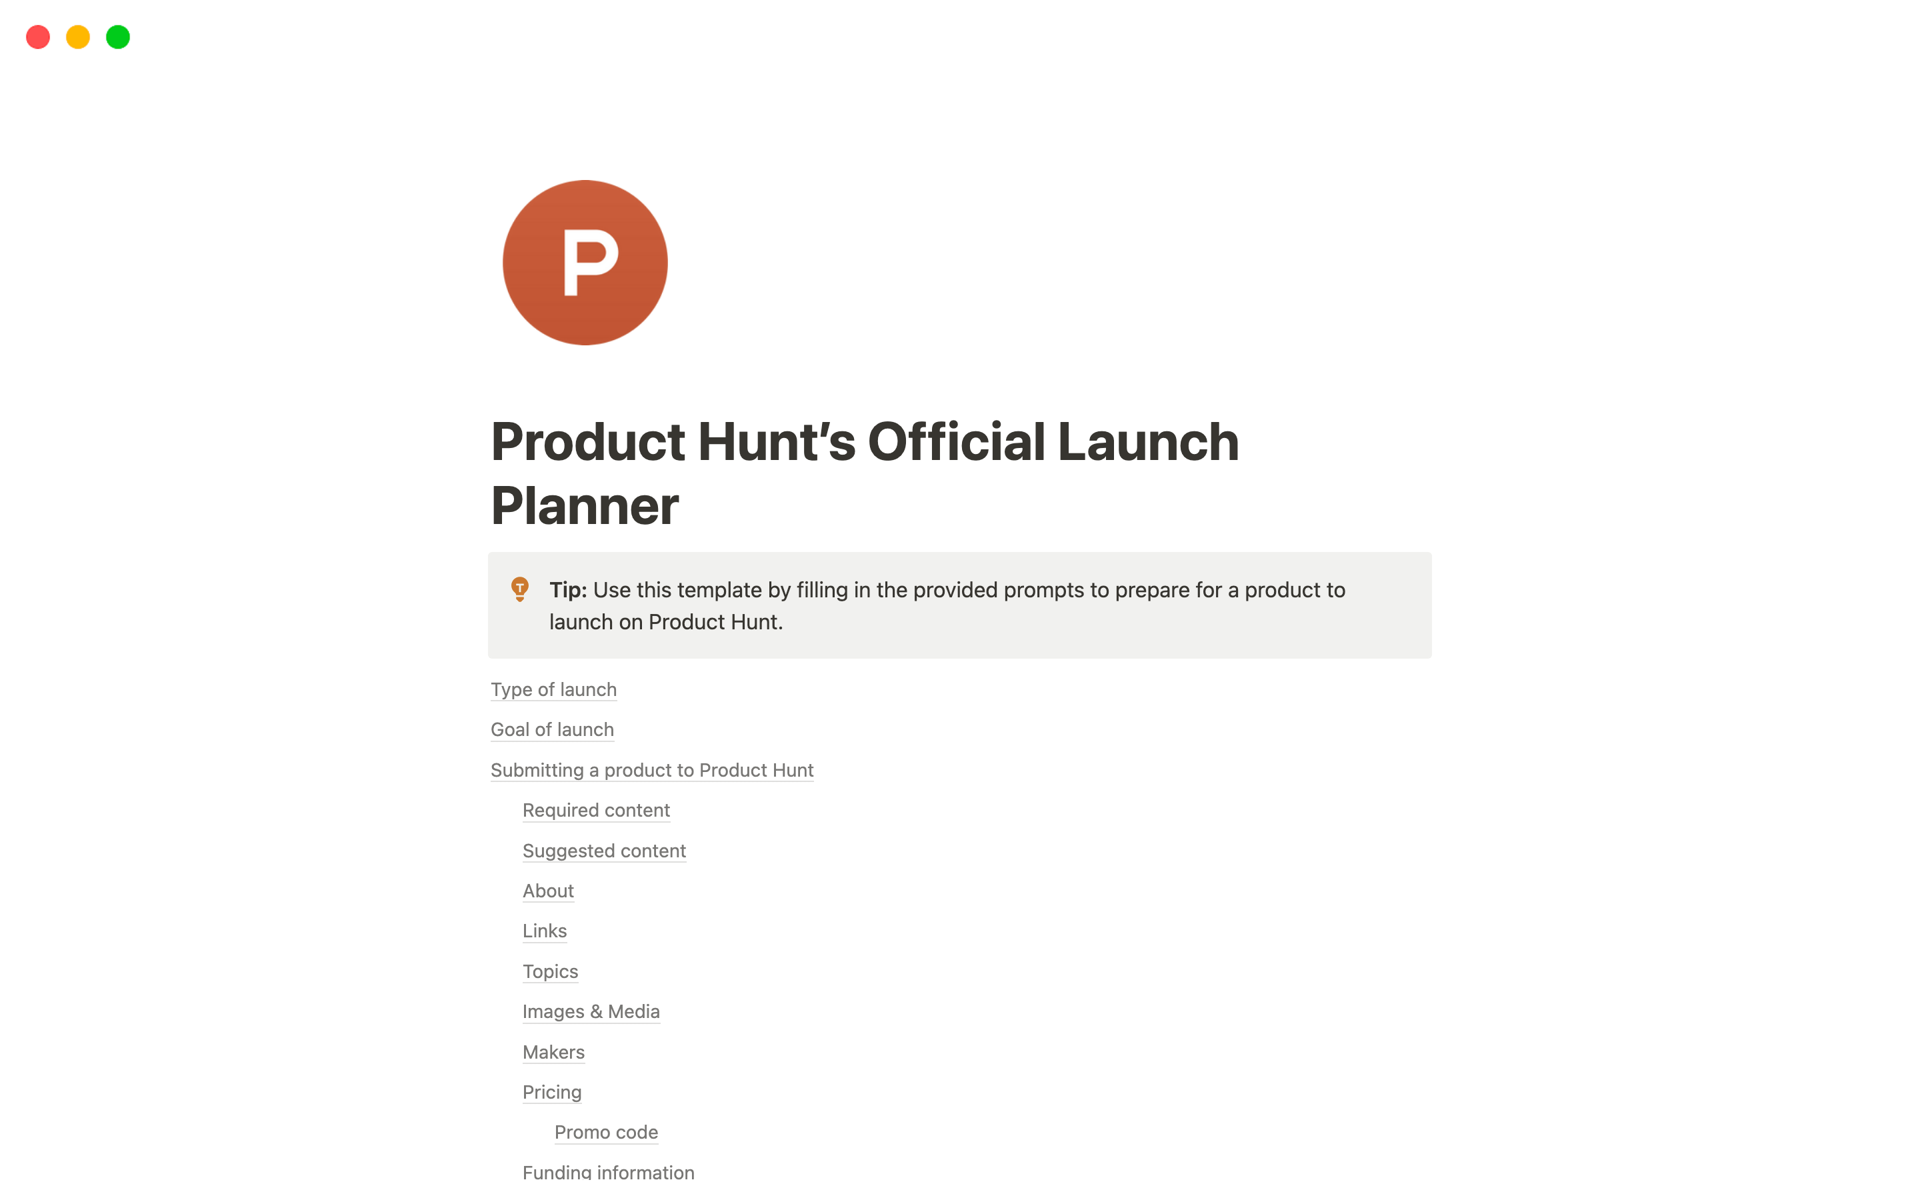 Everything you need to know about launching a product on Product Hunt. 